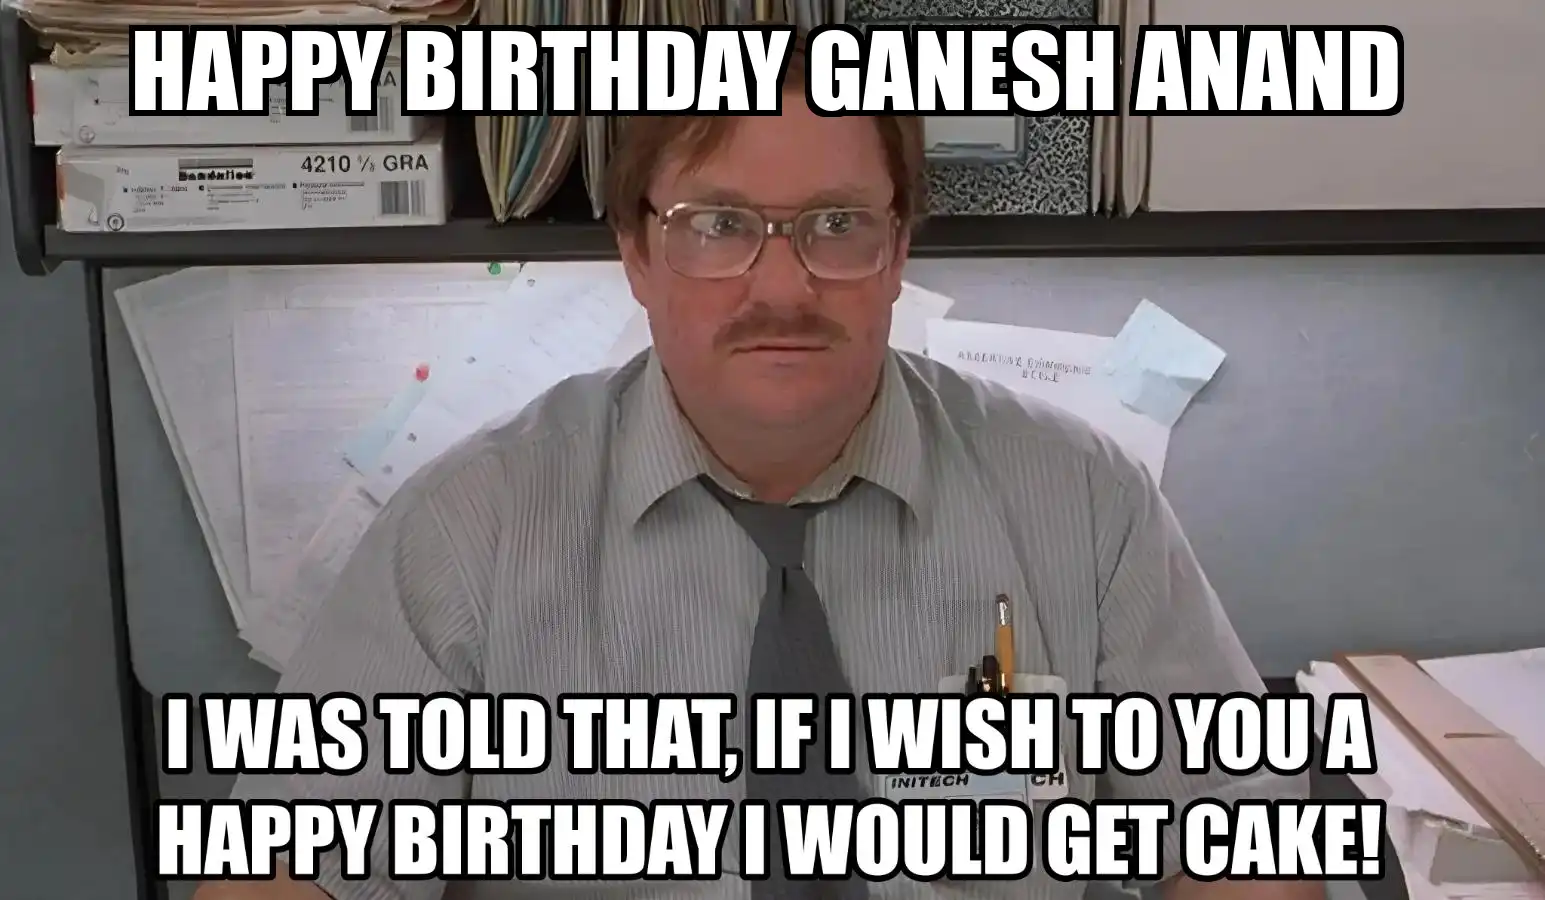 Happy Birthday Ganesh anand I Would Get A Cake Meme